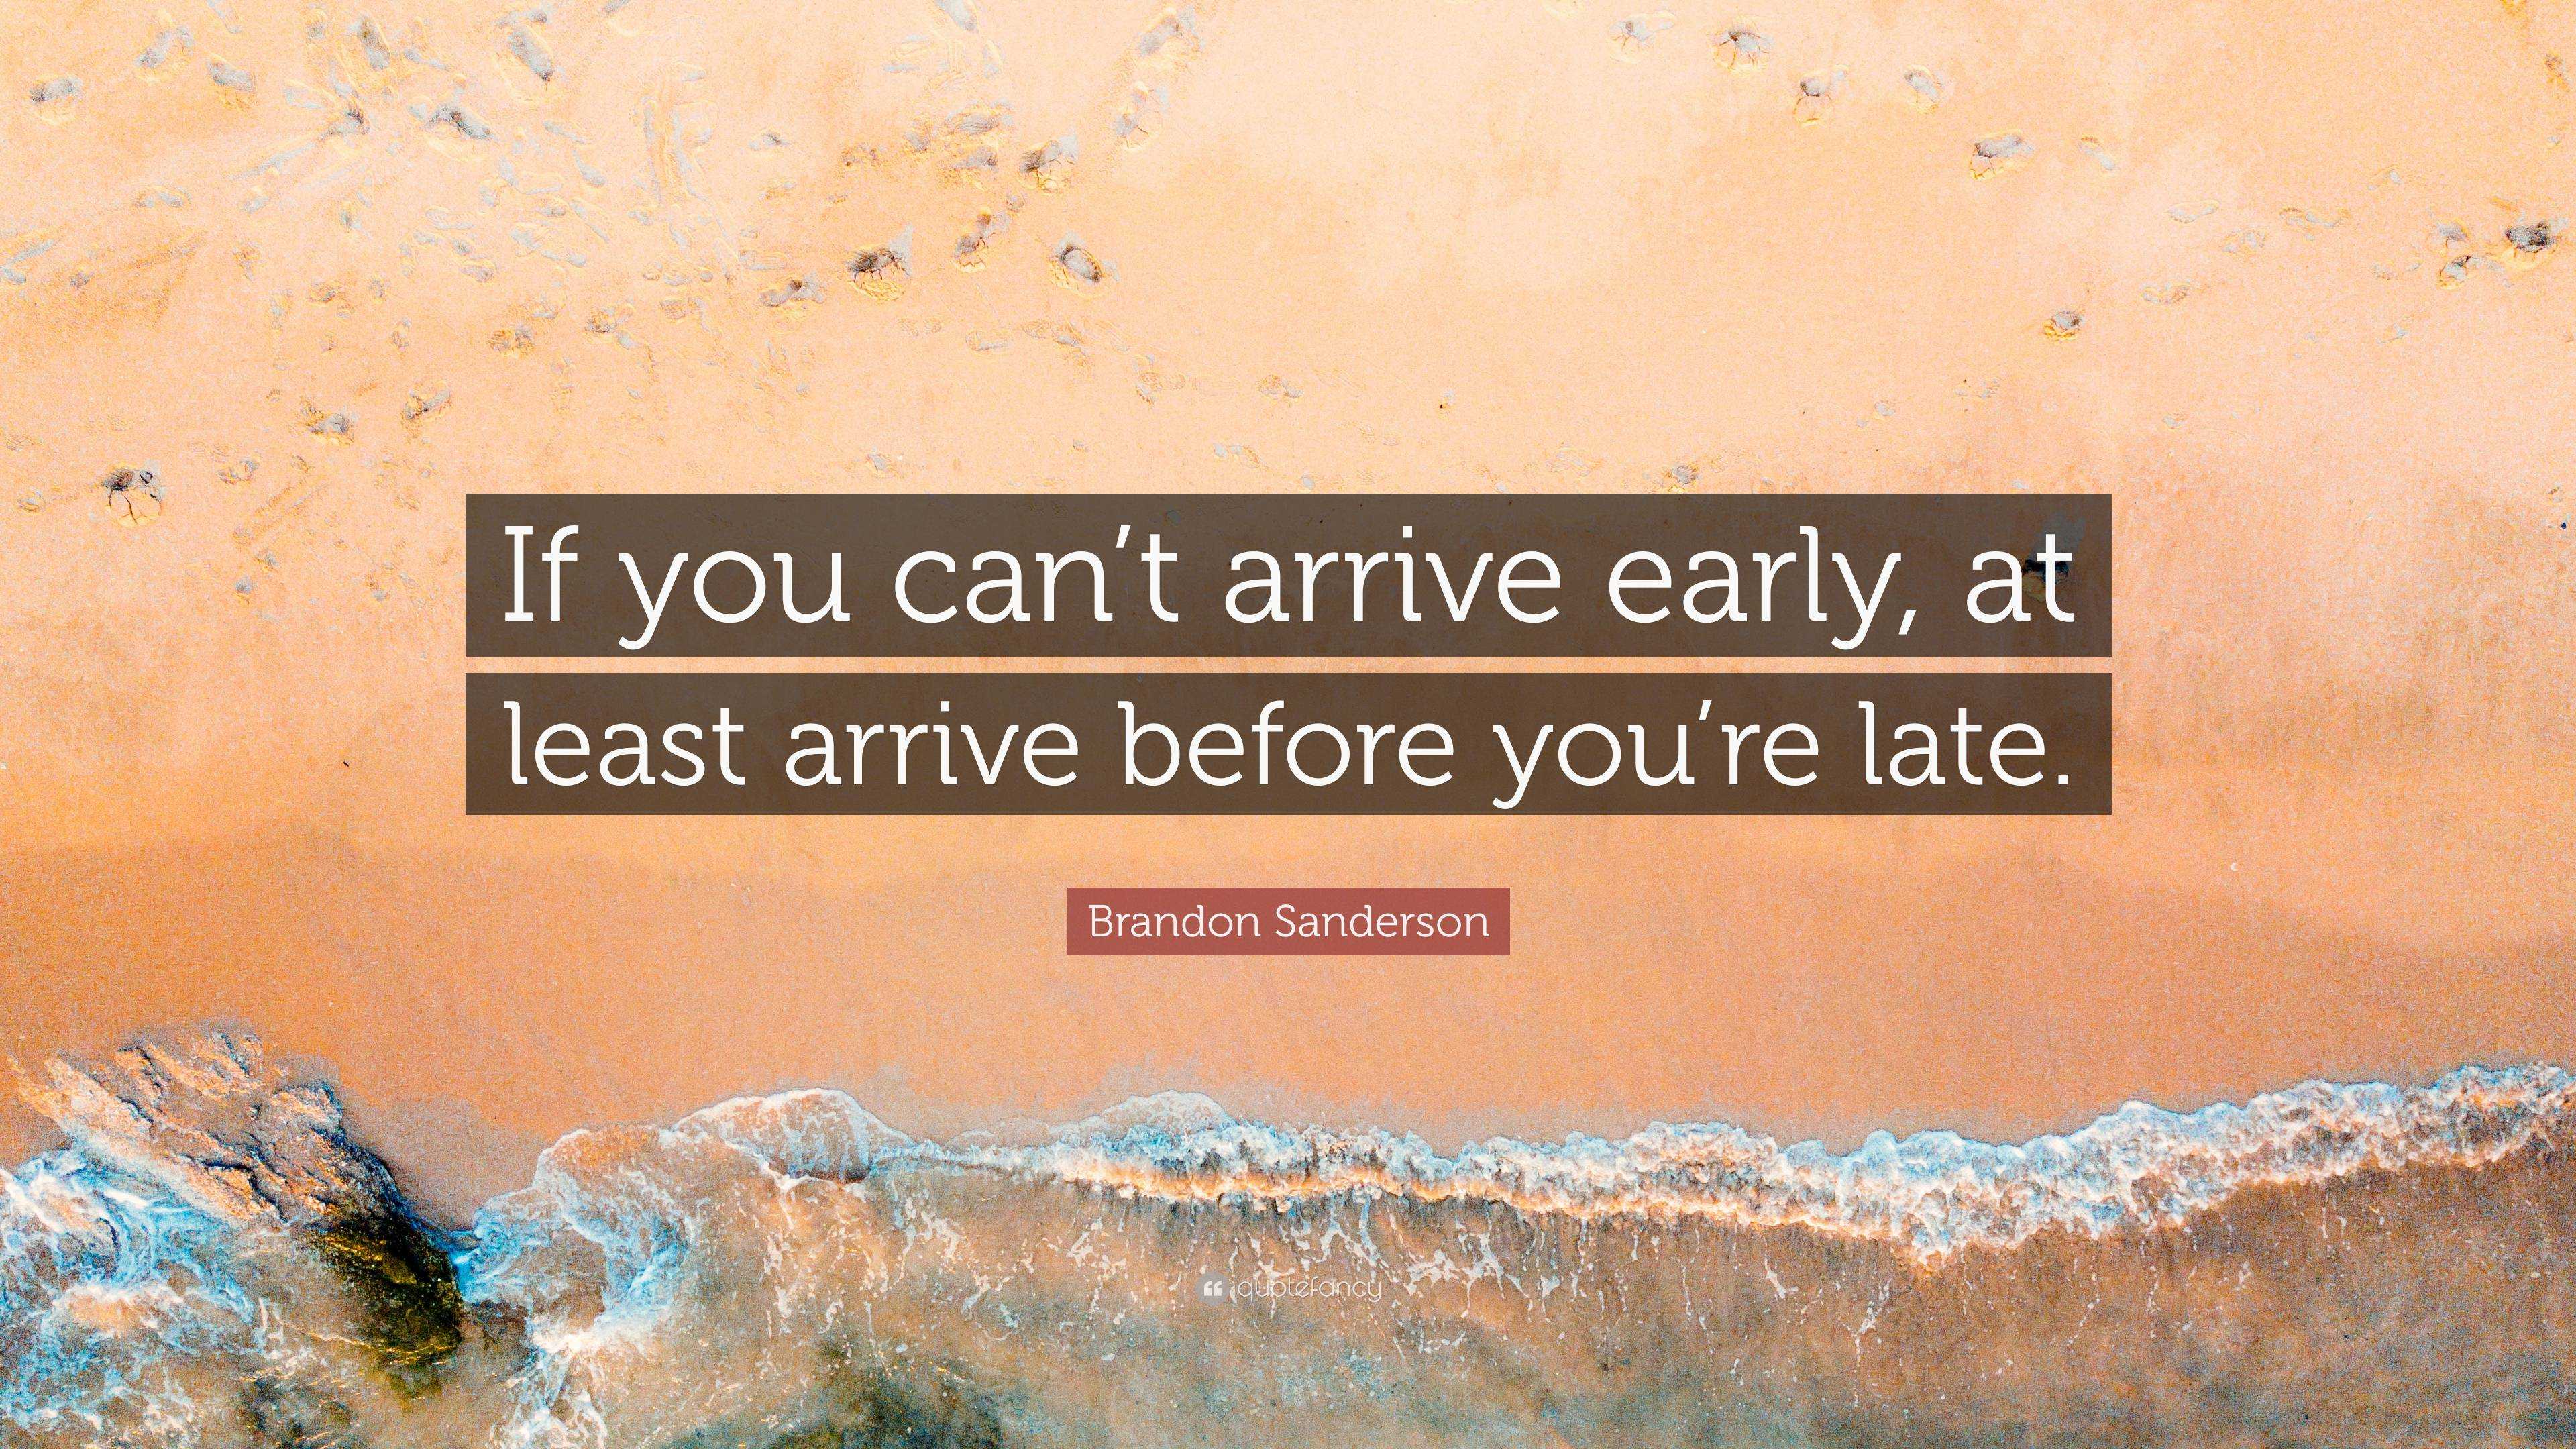 https://quotefancy.com/media/wallpaper/3840x2160/6714956-Brandon-Sanderson-Quote-If-you-can-t-arrive-early-at-least-arrive.jpg